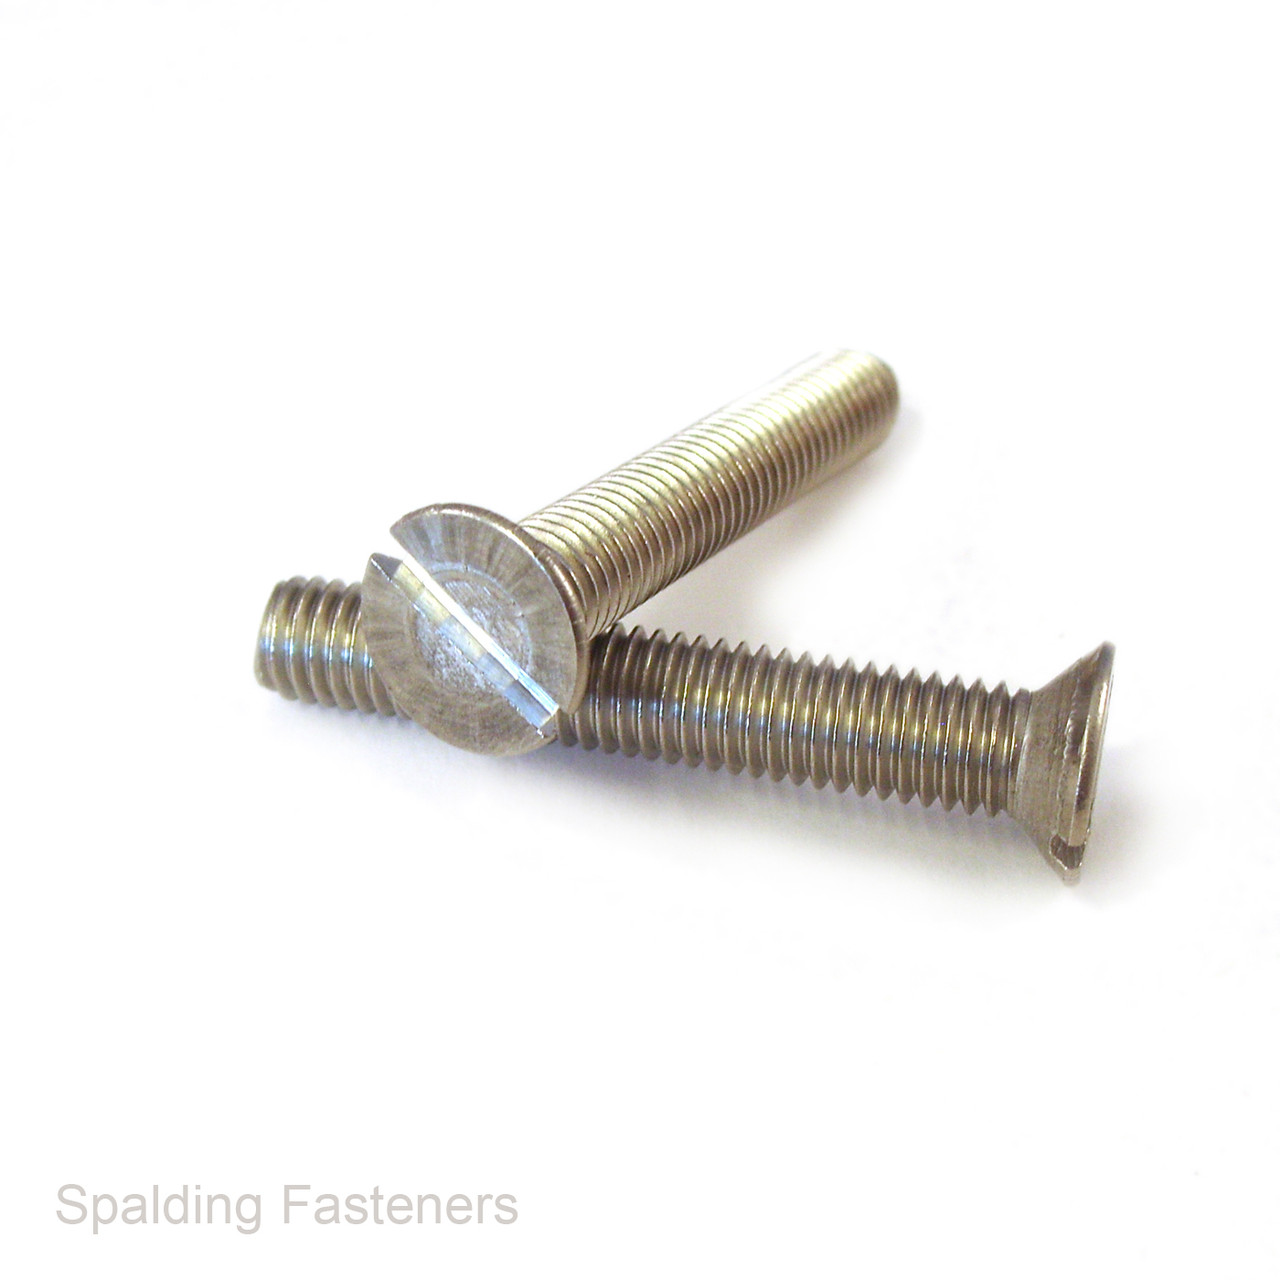 5/16" UNC A2 Stainless Steel Countersunk Slotted Head Machine Screws